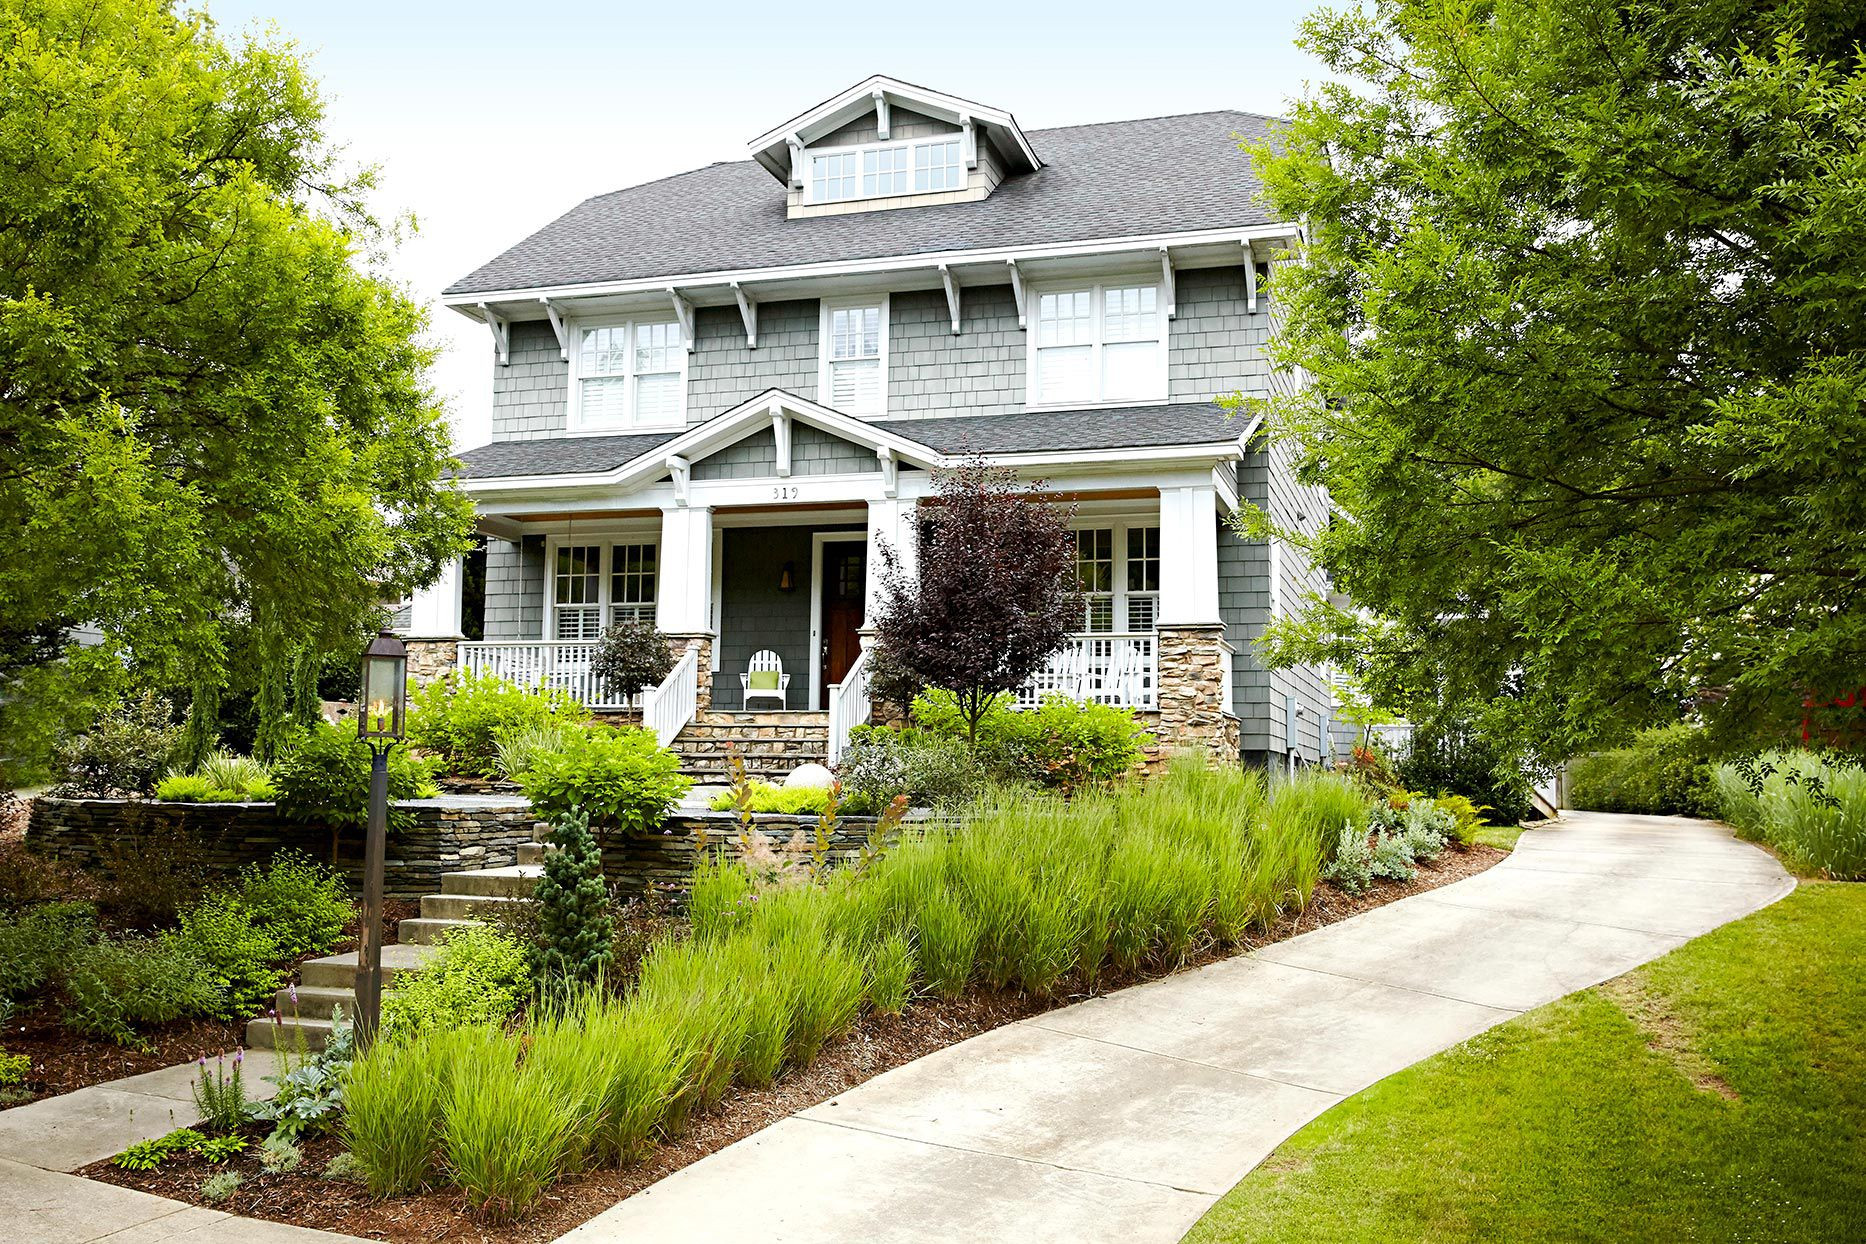 Landscaping Ideas for Your Front Yard on a Budget